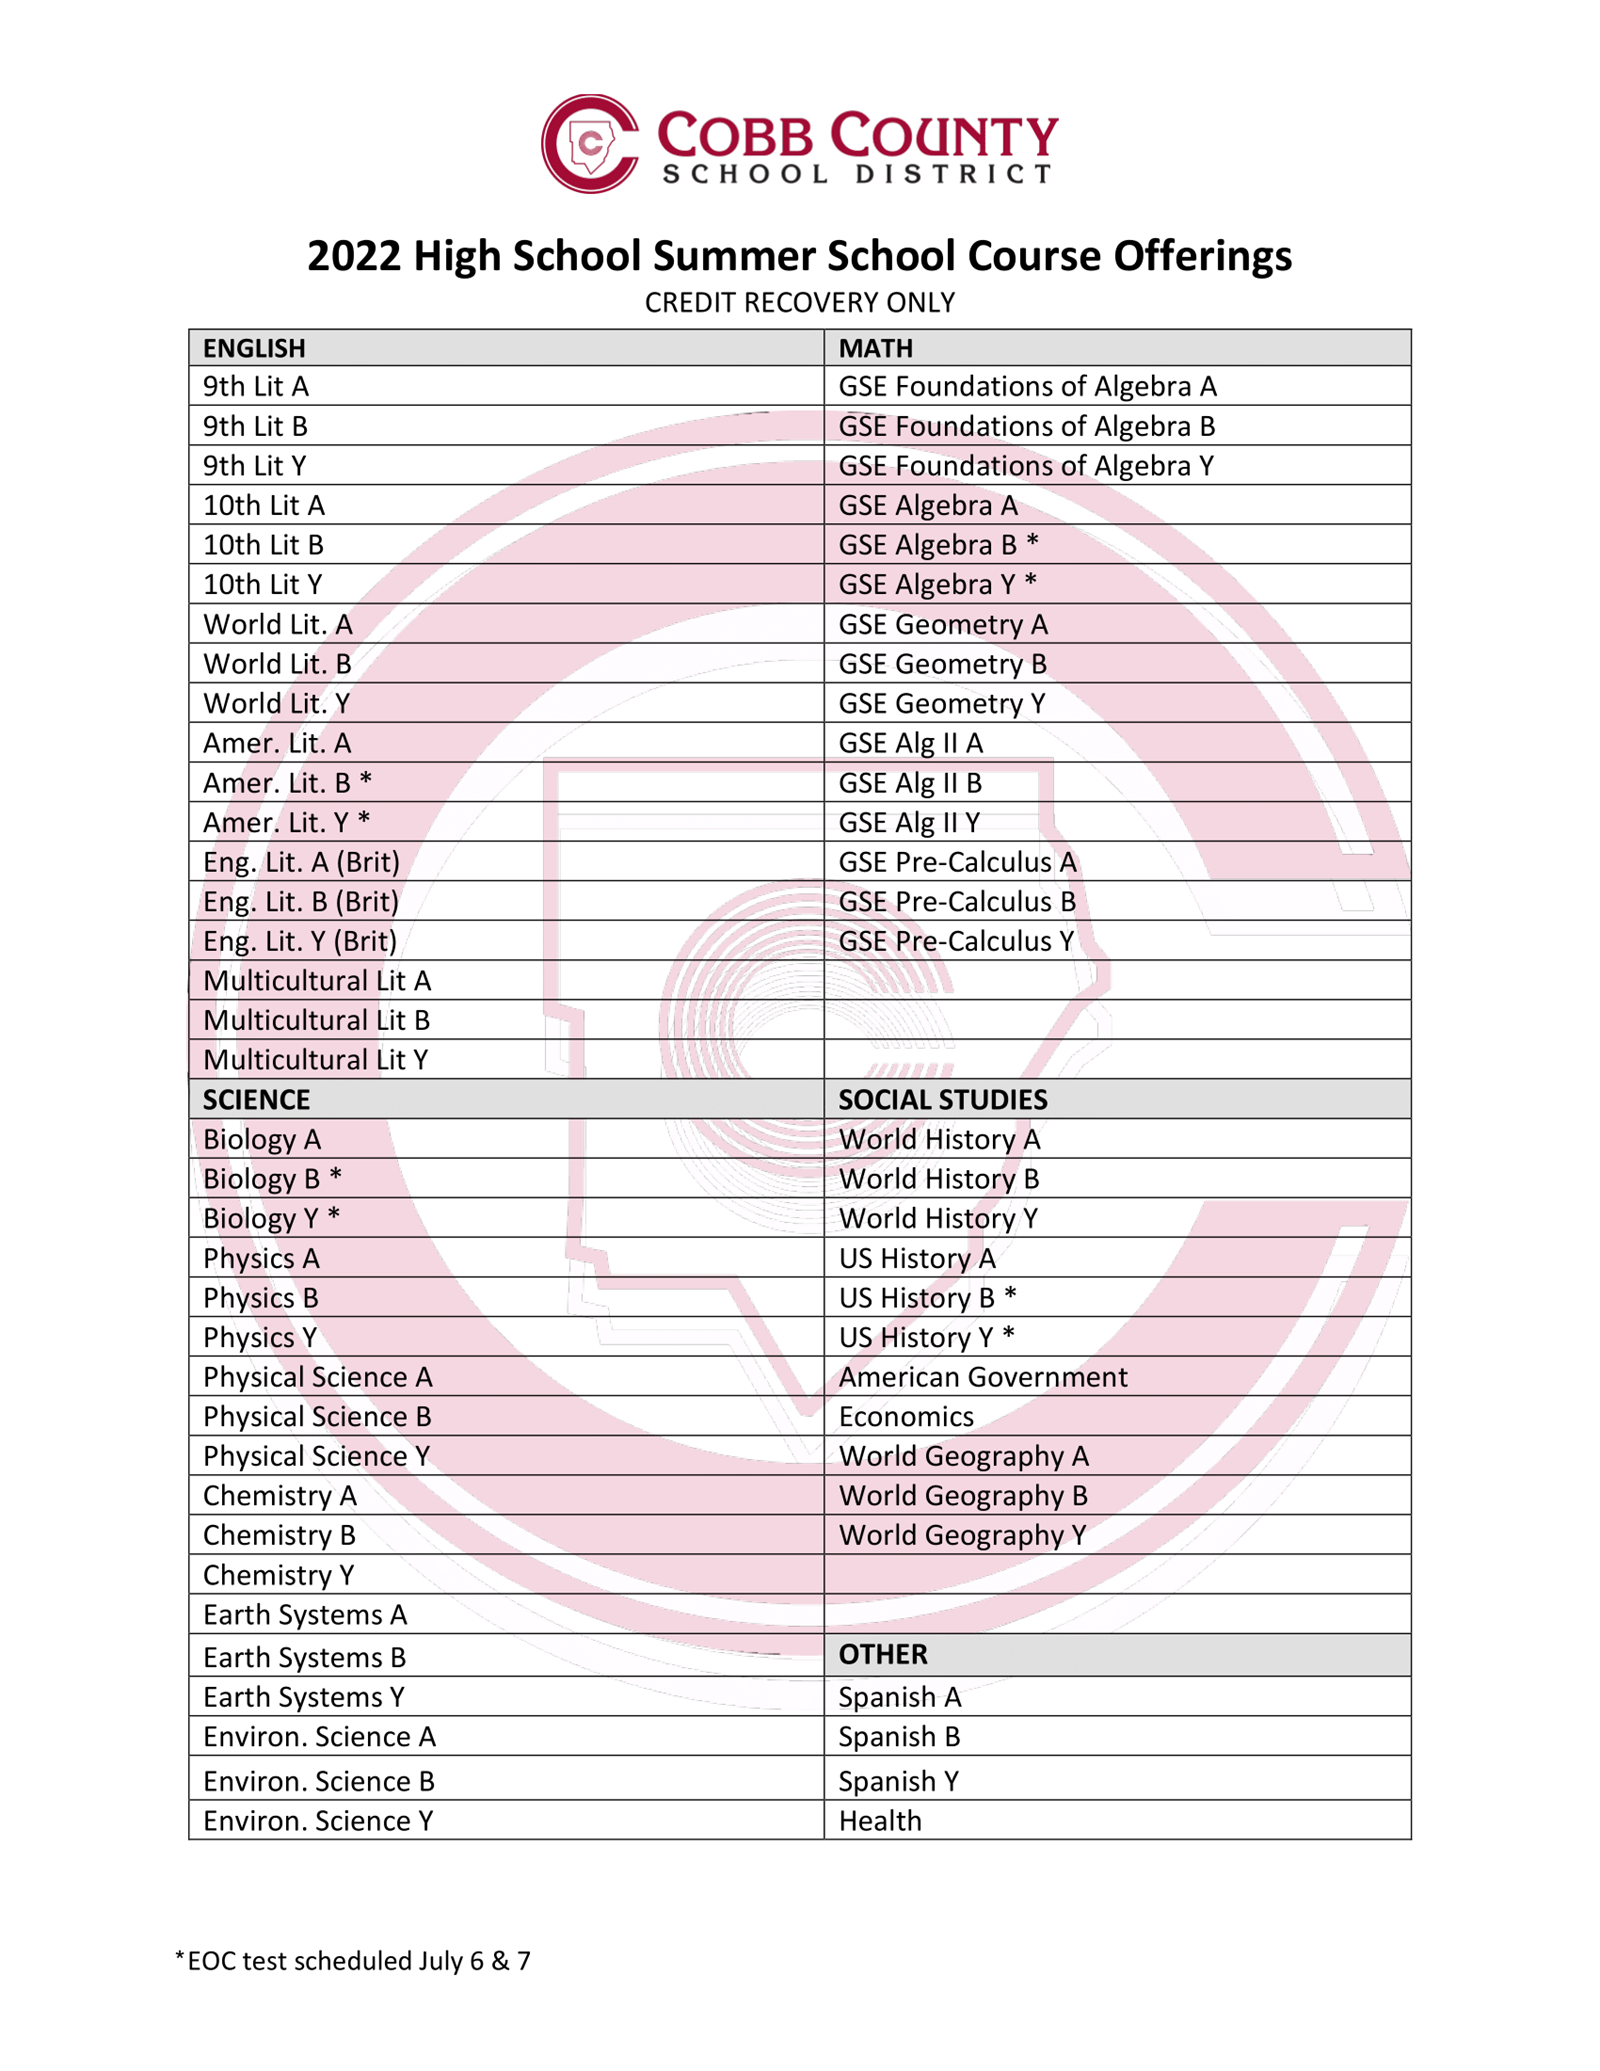 2022%20H.S.%20Course%20Offerings%20%20%20(1)-1.png